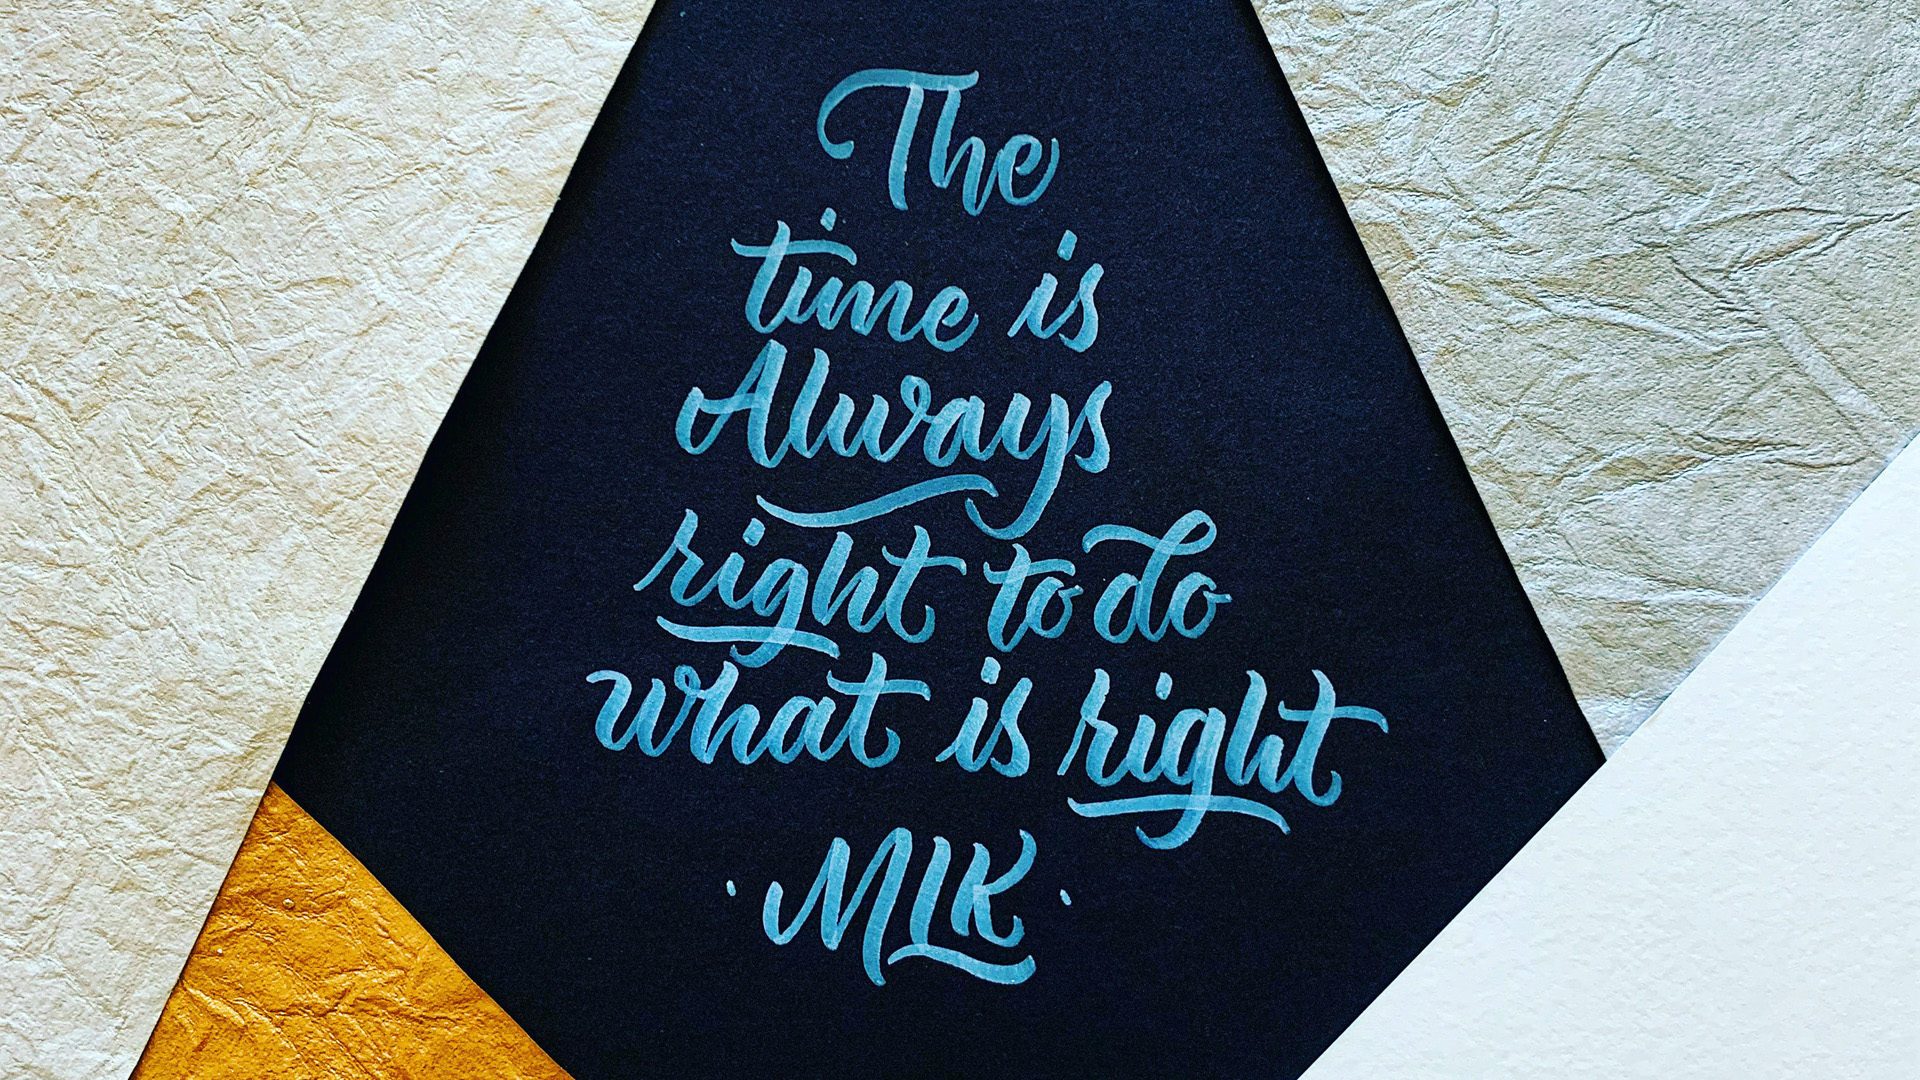 "The time is Always right to do what is right" MLK. Martin Luther King Jr. quote painted with light blue paint on a navy blue wall. Textured background.